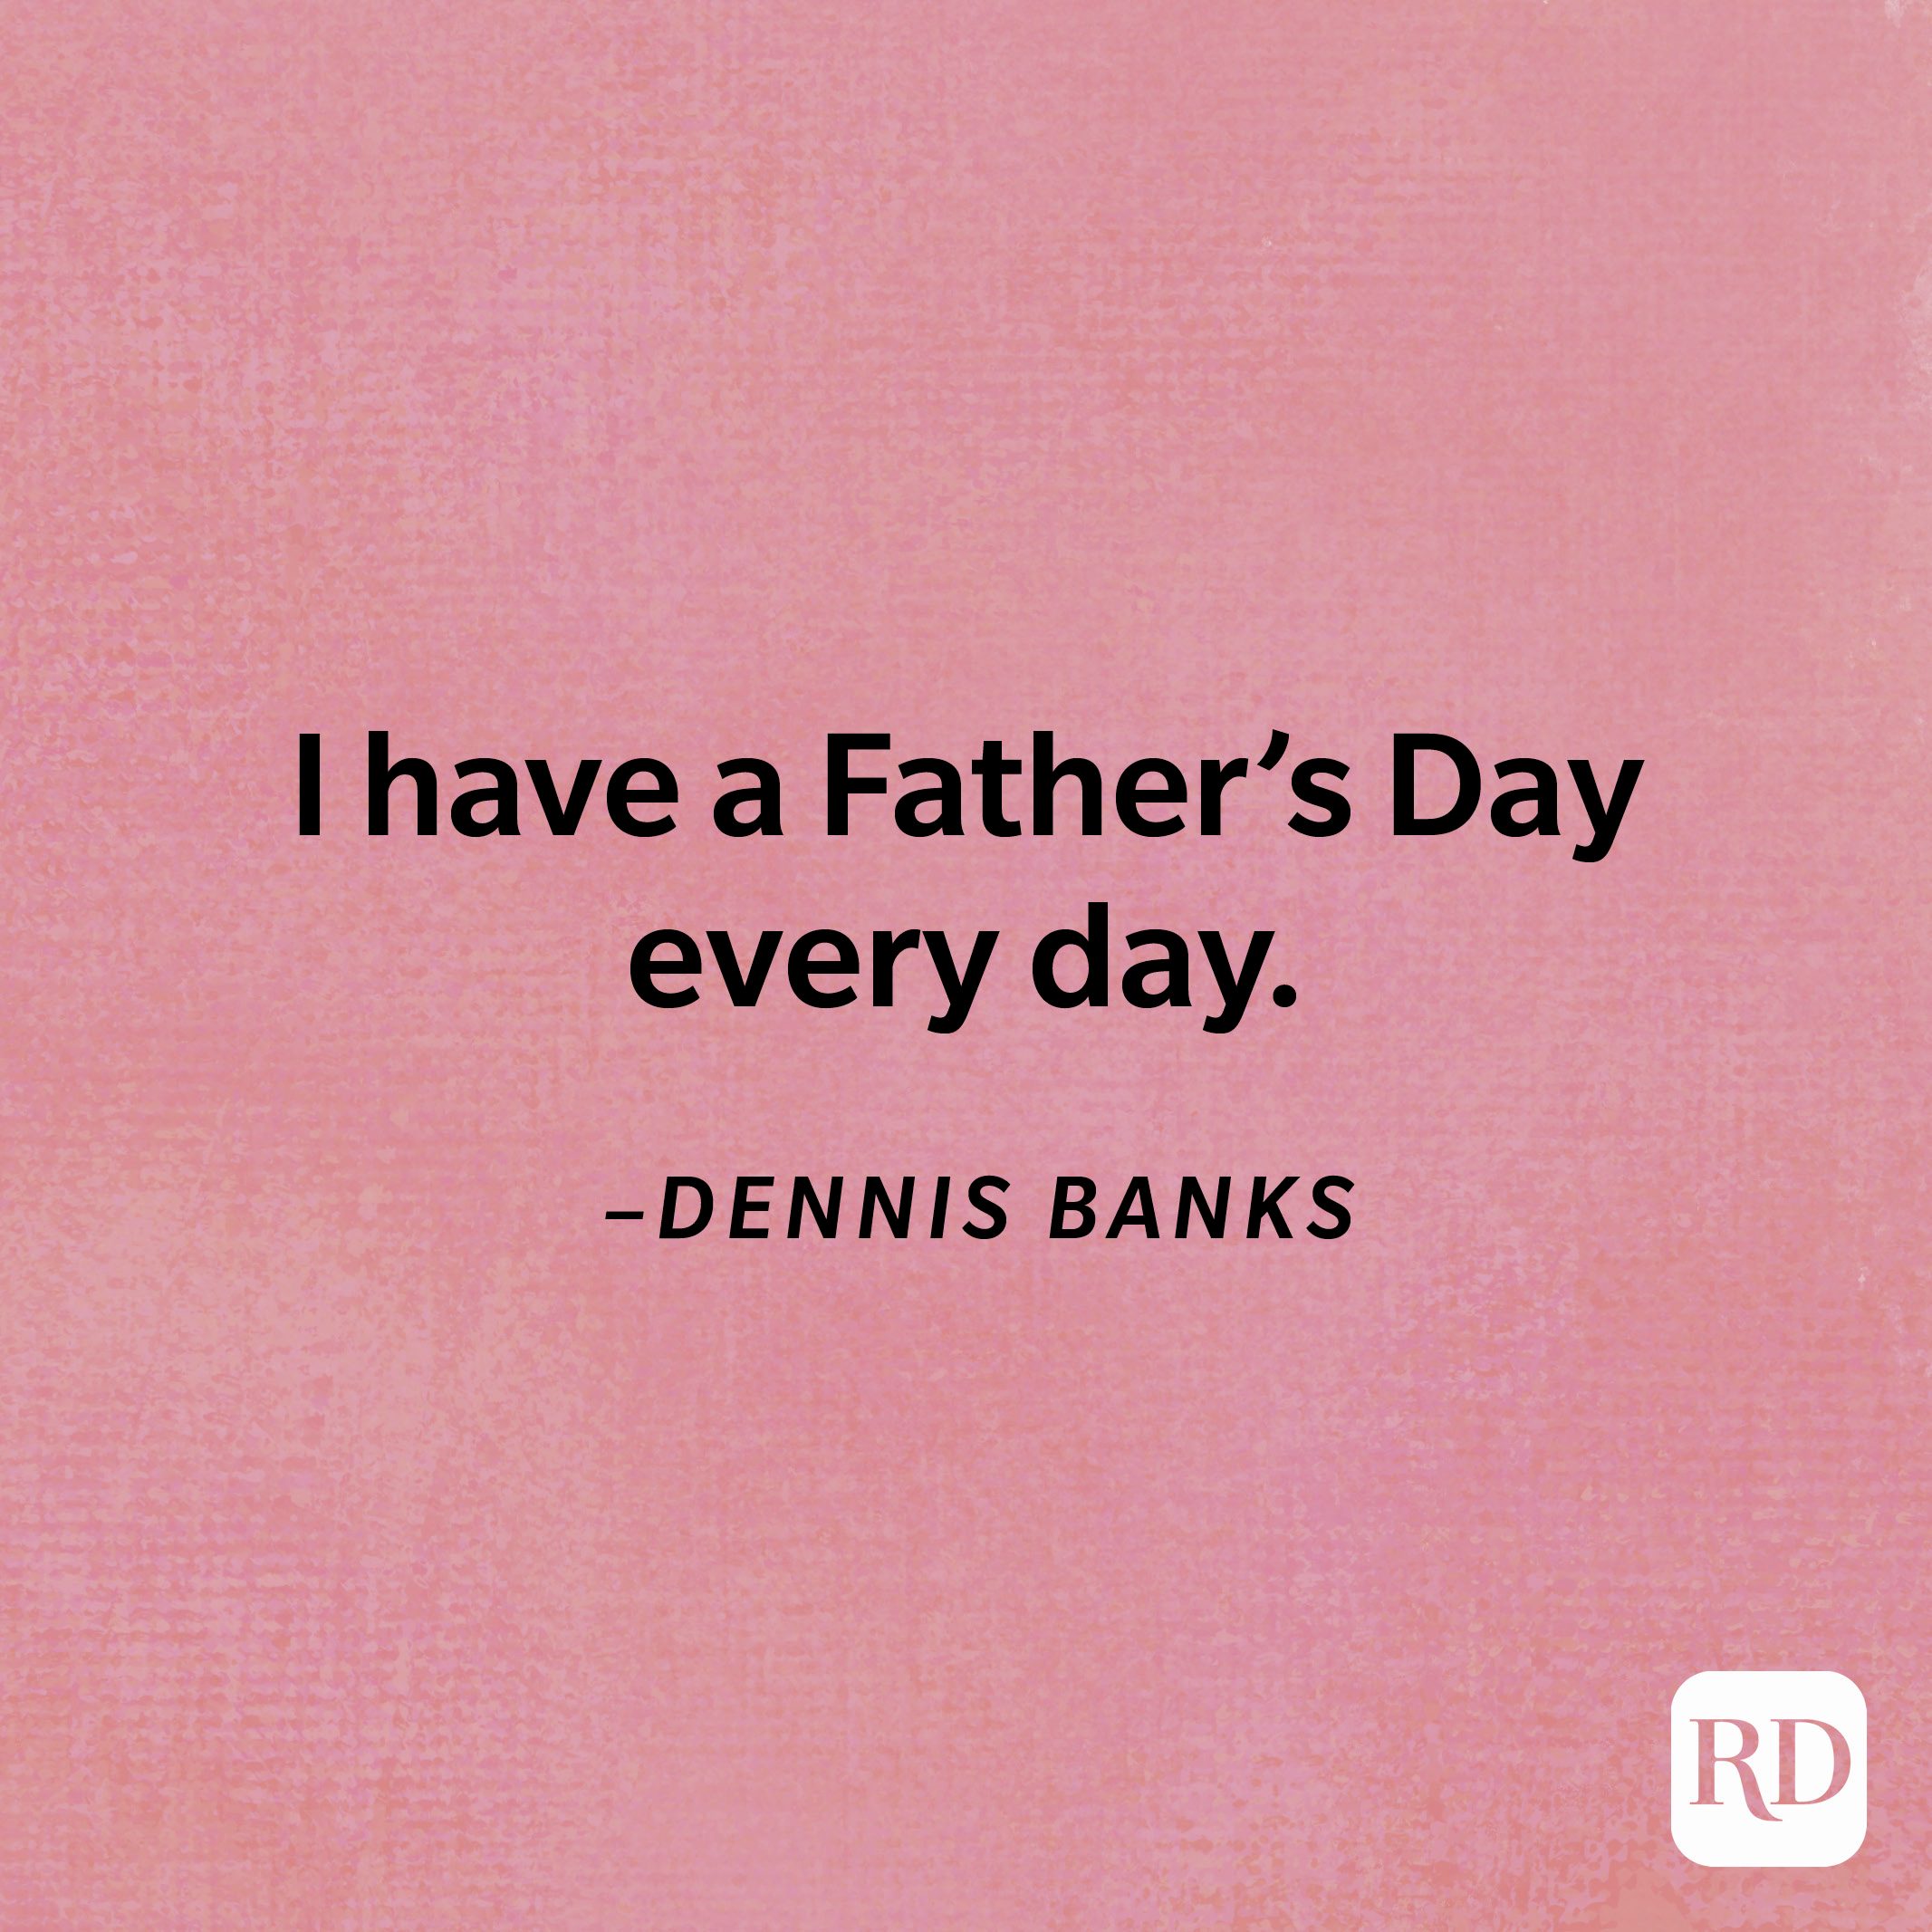 “I have a Father's Day every day.”—Dennis Banks